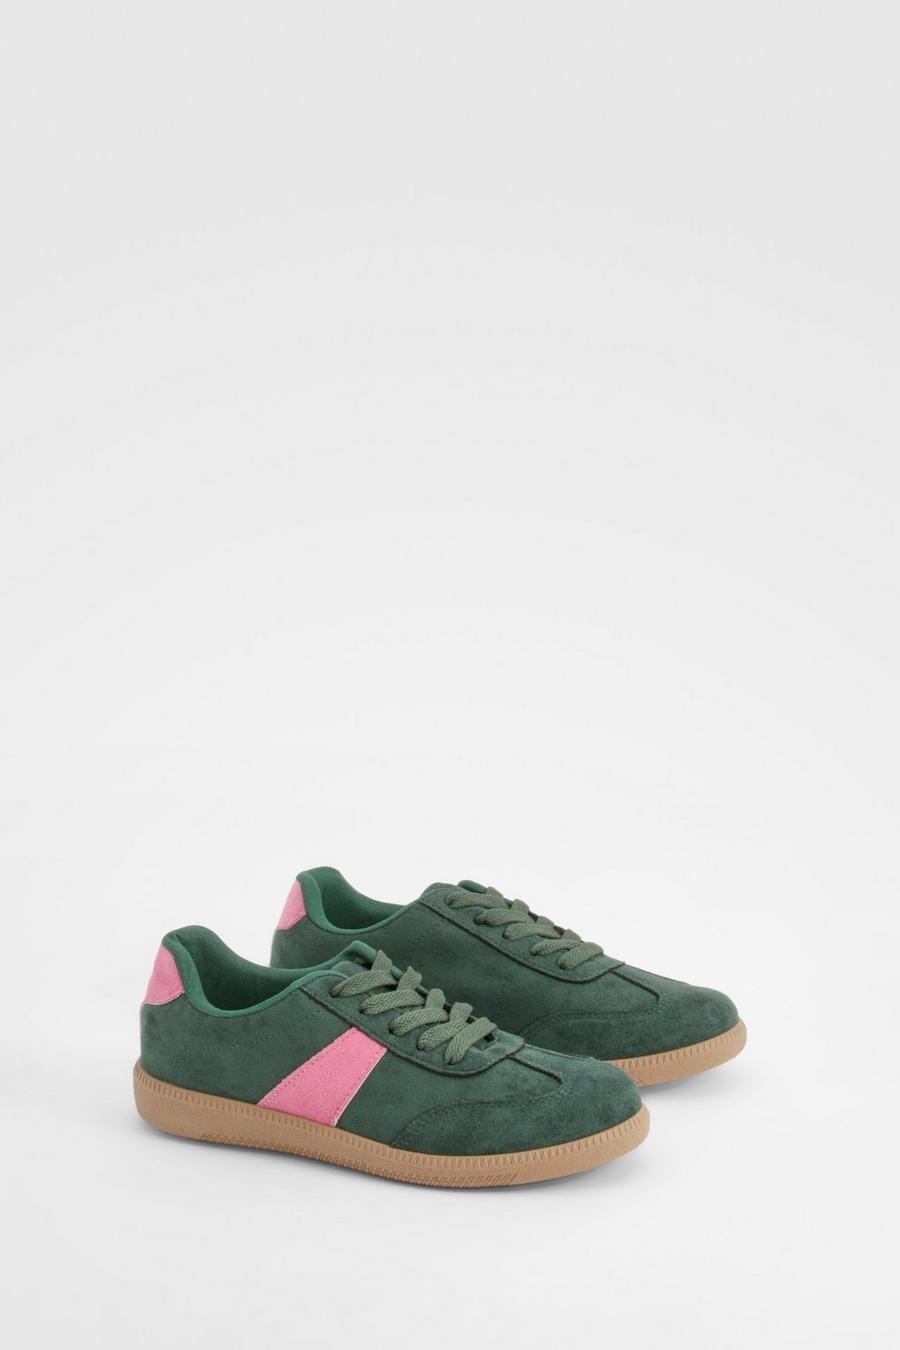 Green Contrast Panel Gum Sole Trainers